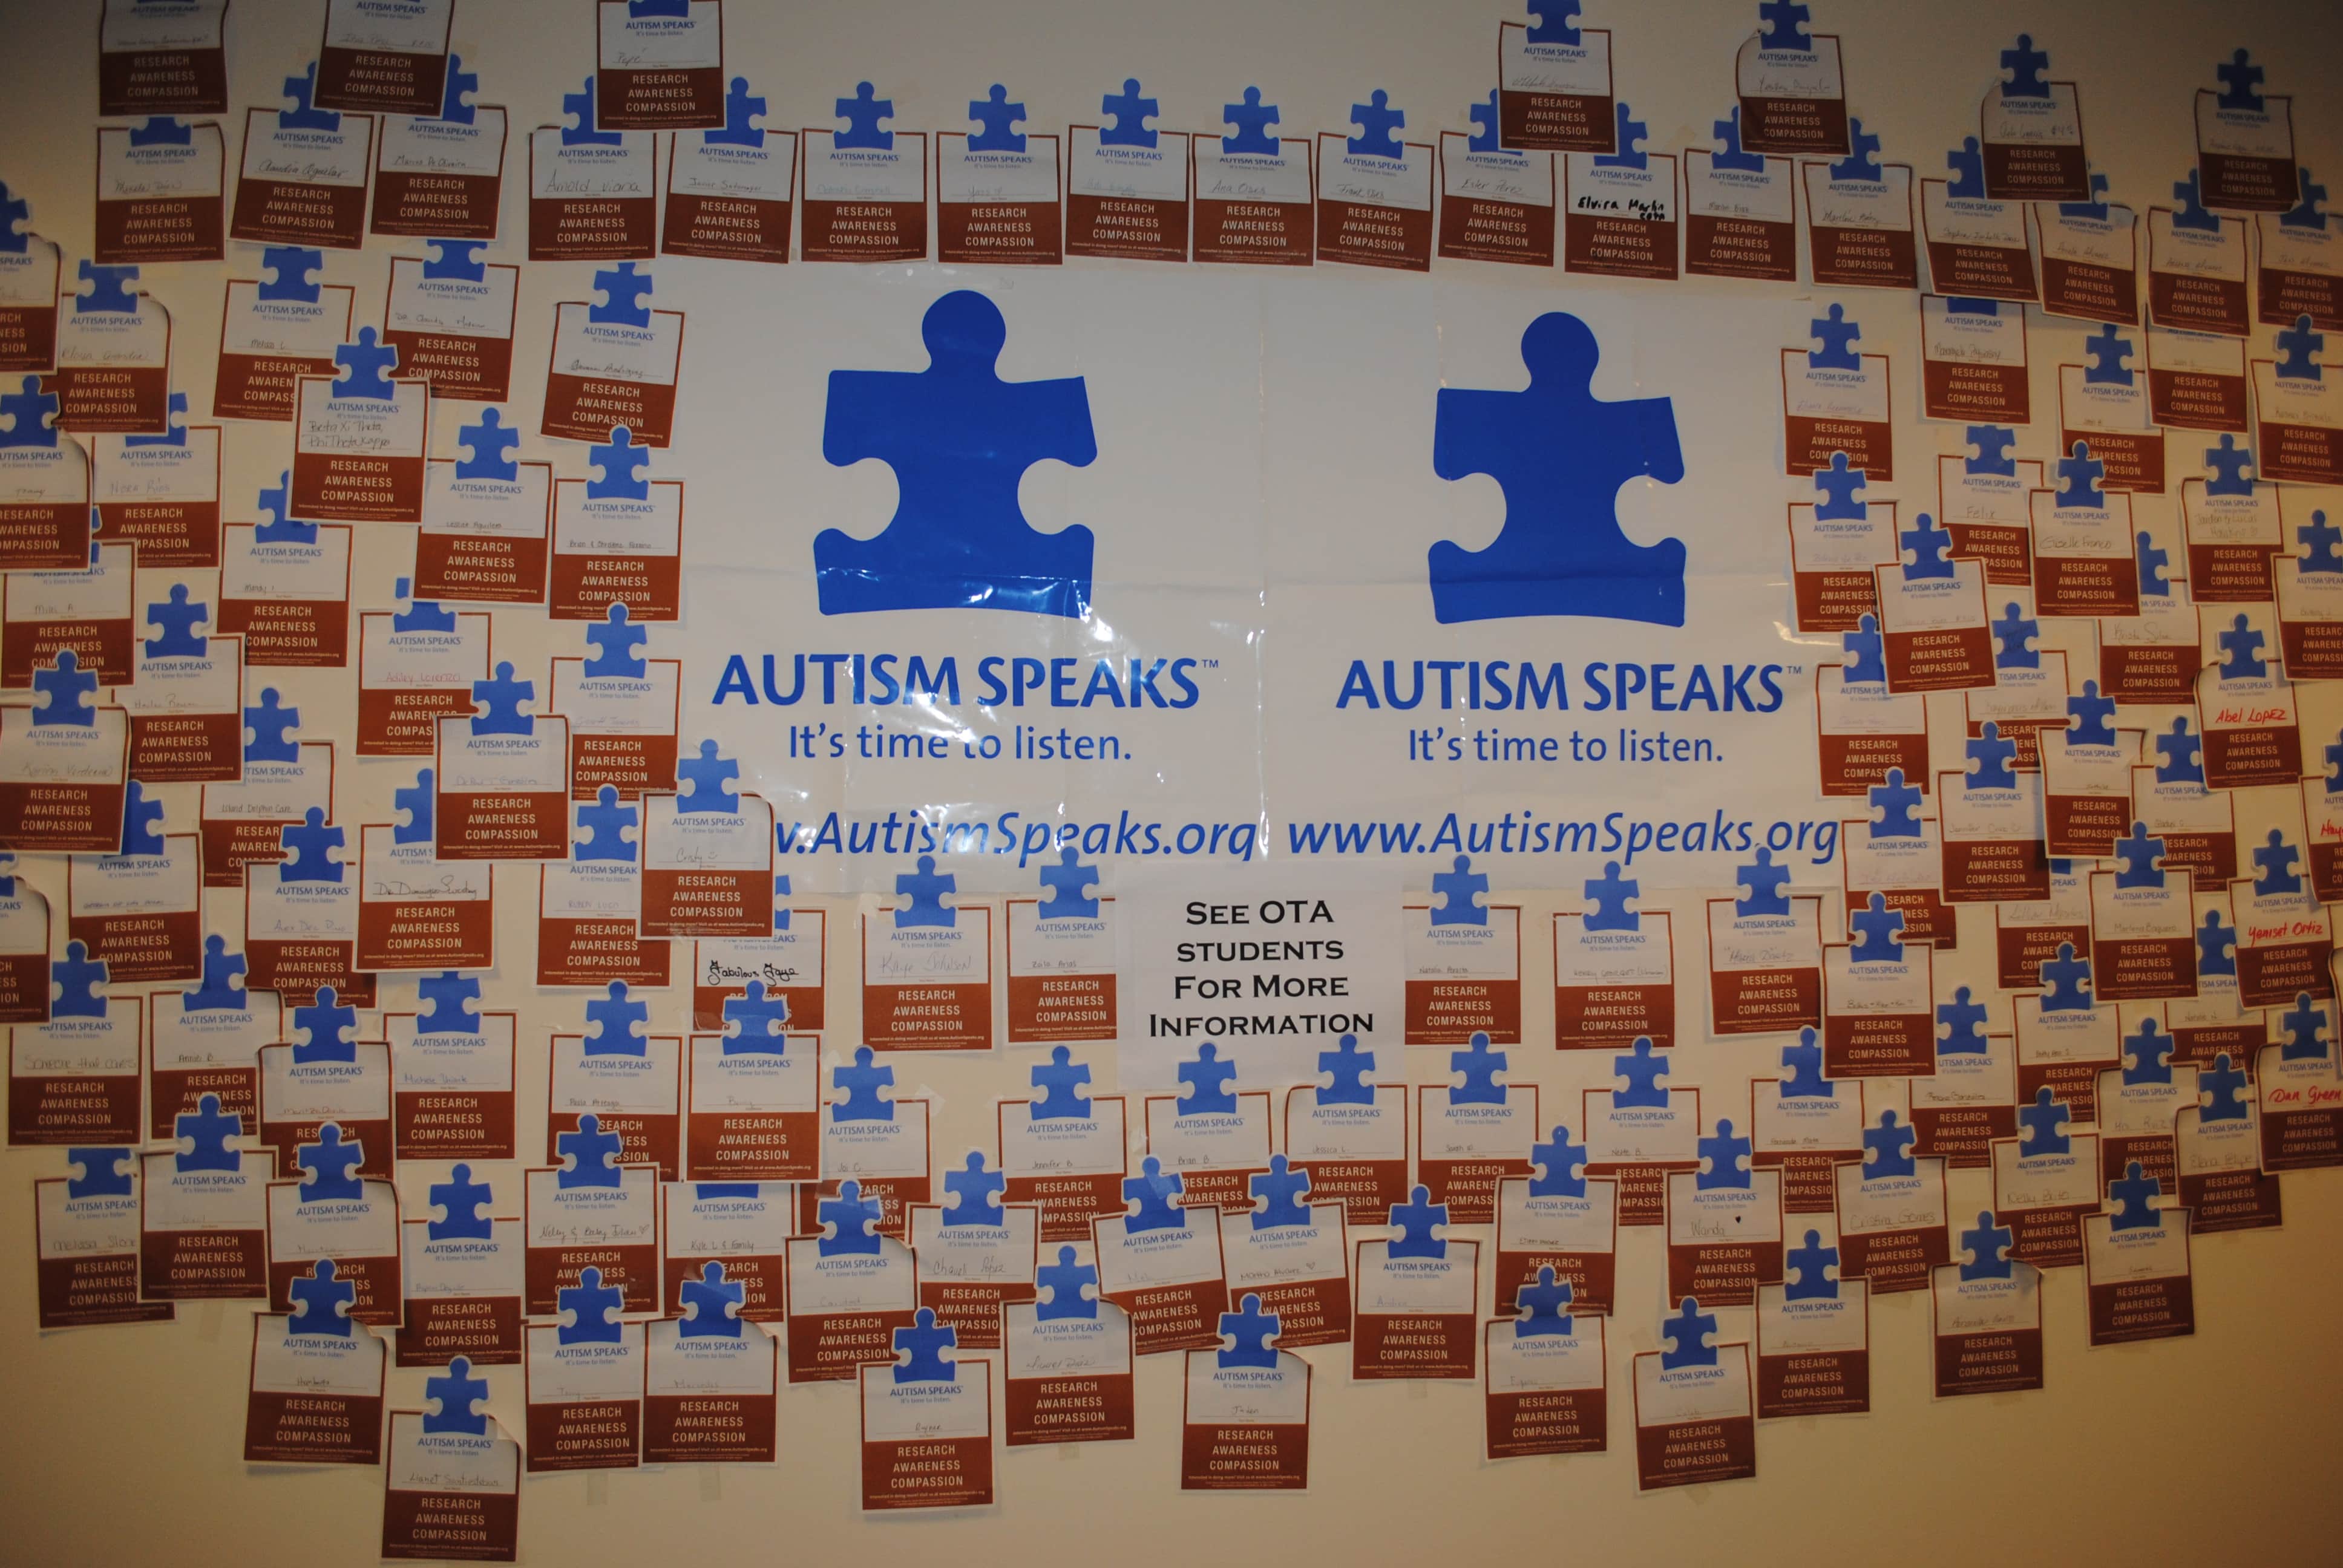 Occupational Therapy Assistant Students in Miami Raise Money for Autism Speaks